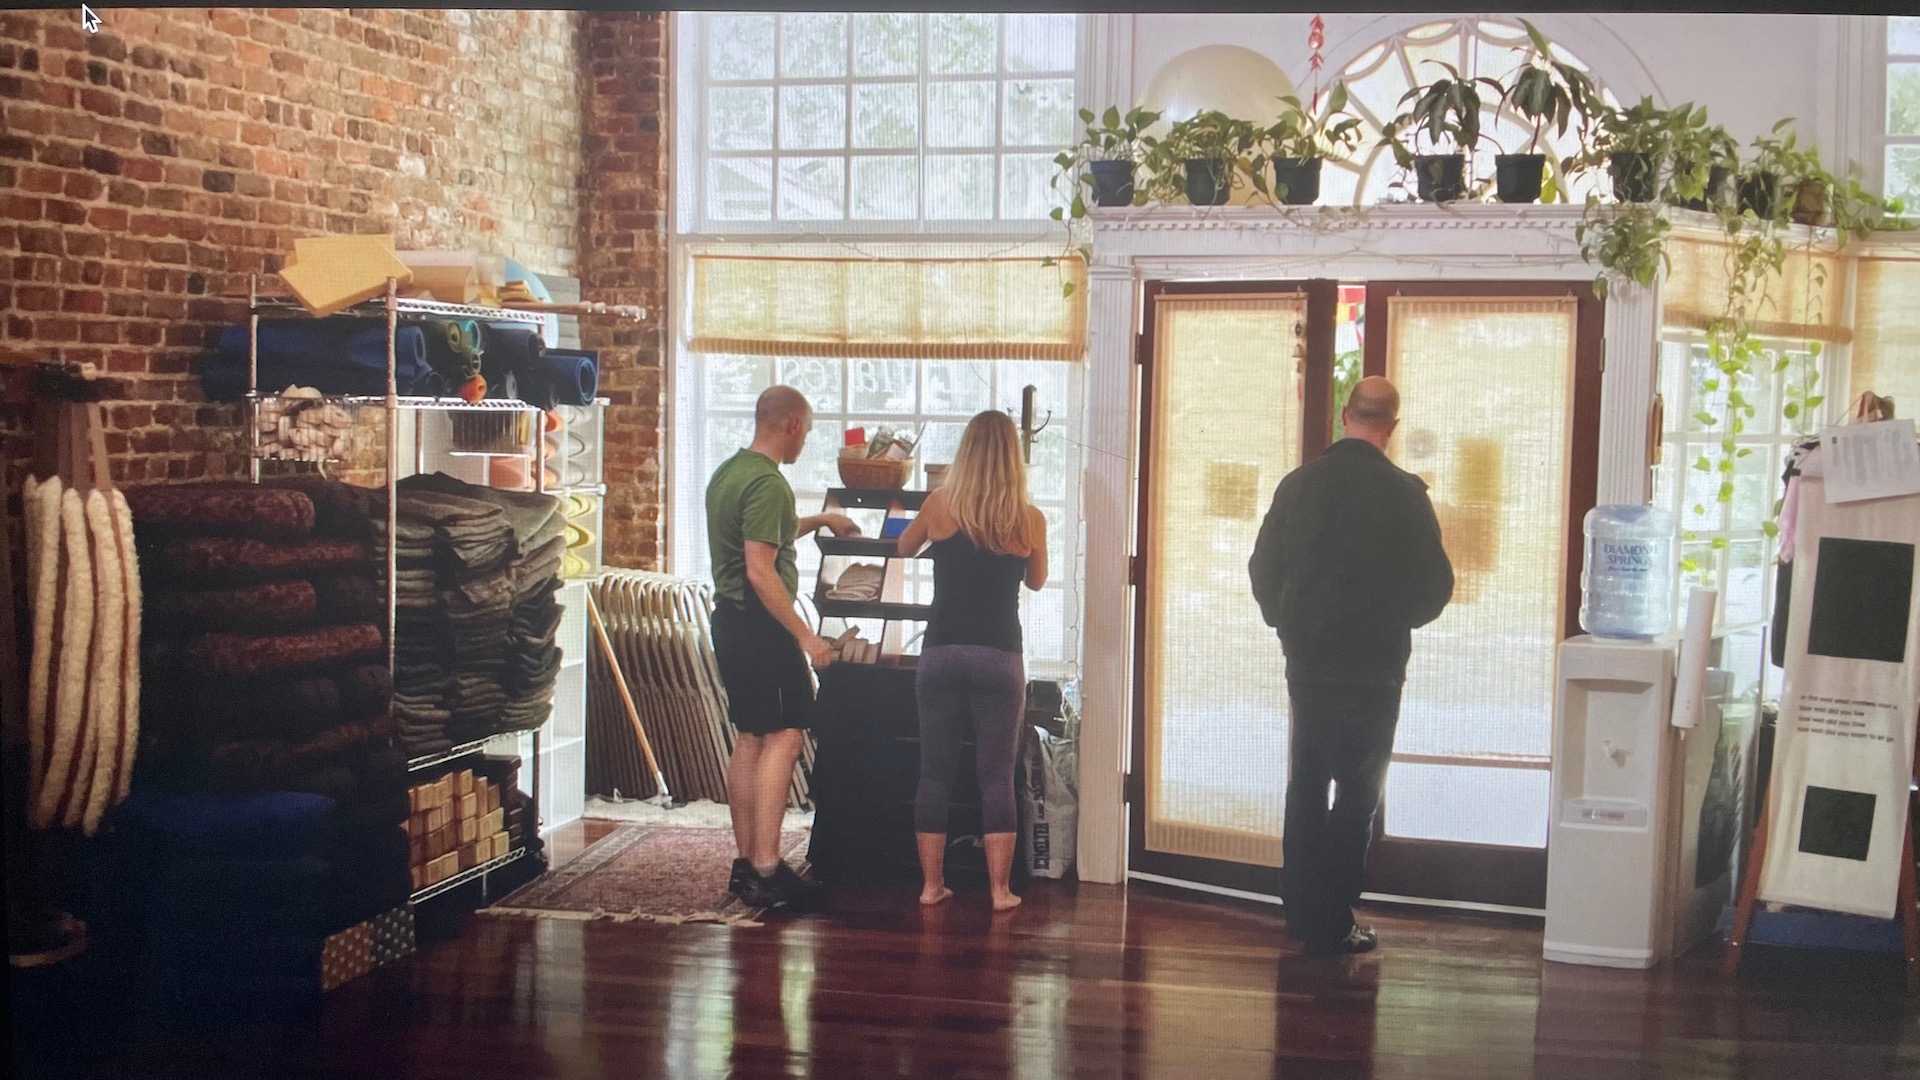 The inside of 8th Street Yoga Studio facing toward 8th Street, sunlight streaming in. Bolsters, Blankets, and Blocks stacked on the left against the brick wall. To the right Scott Lundgren in a green t-shirt, gray shorts, blonde woman to the right arranging face towels on a bookcase in front of a window. A slim bald man in a dark green jacket and black pants leaving the studio.